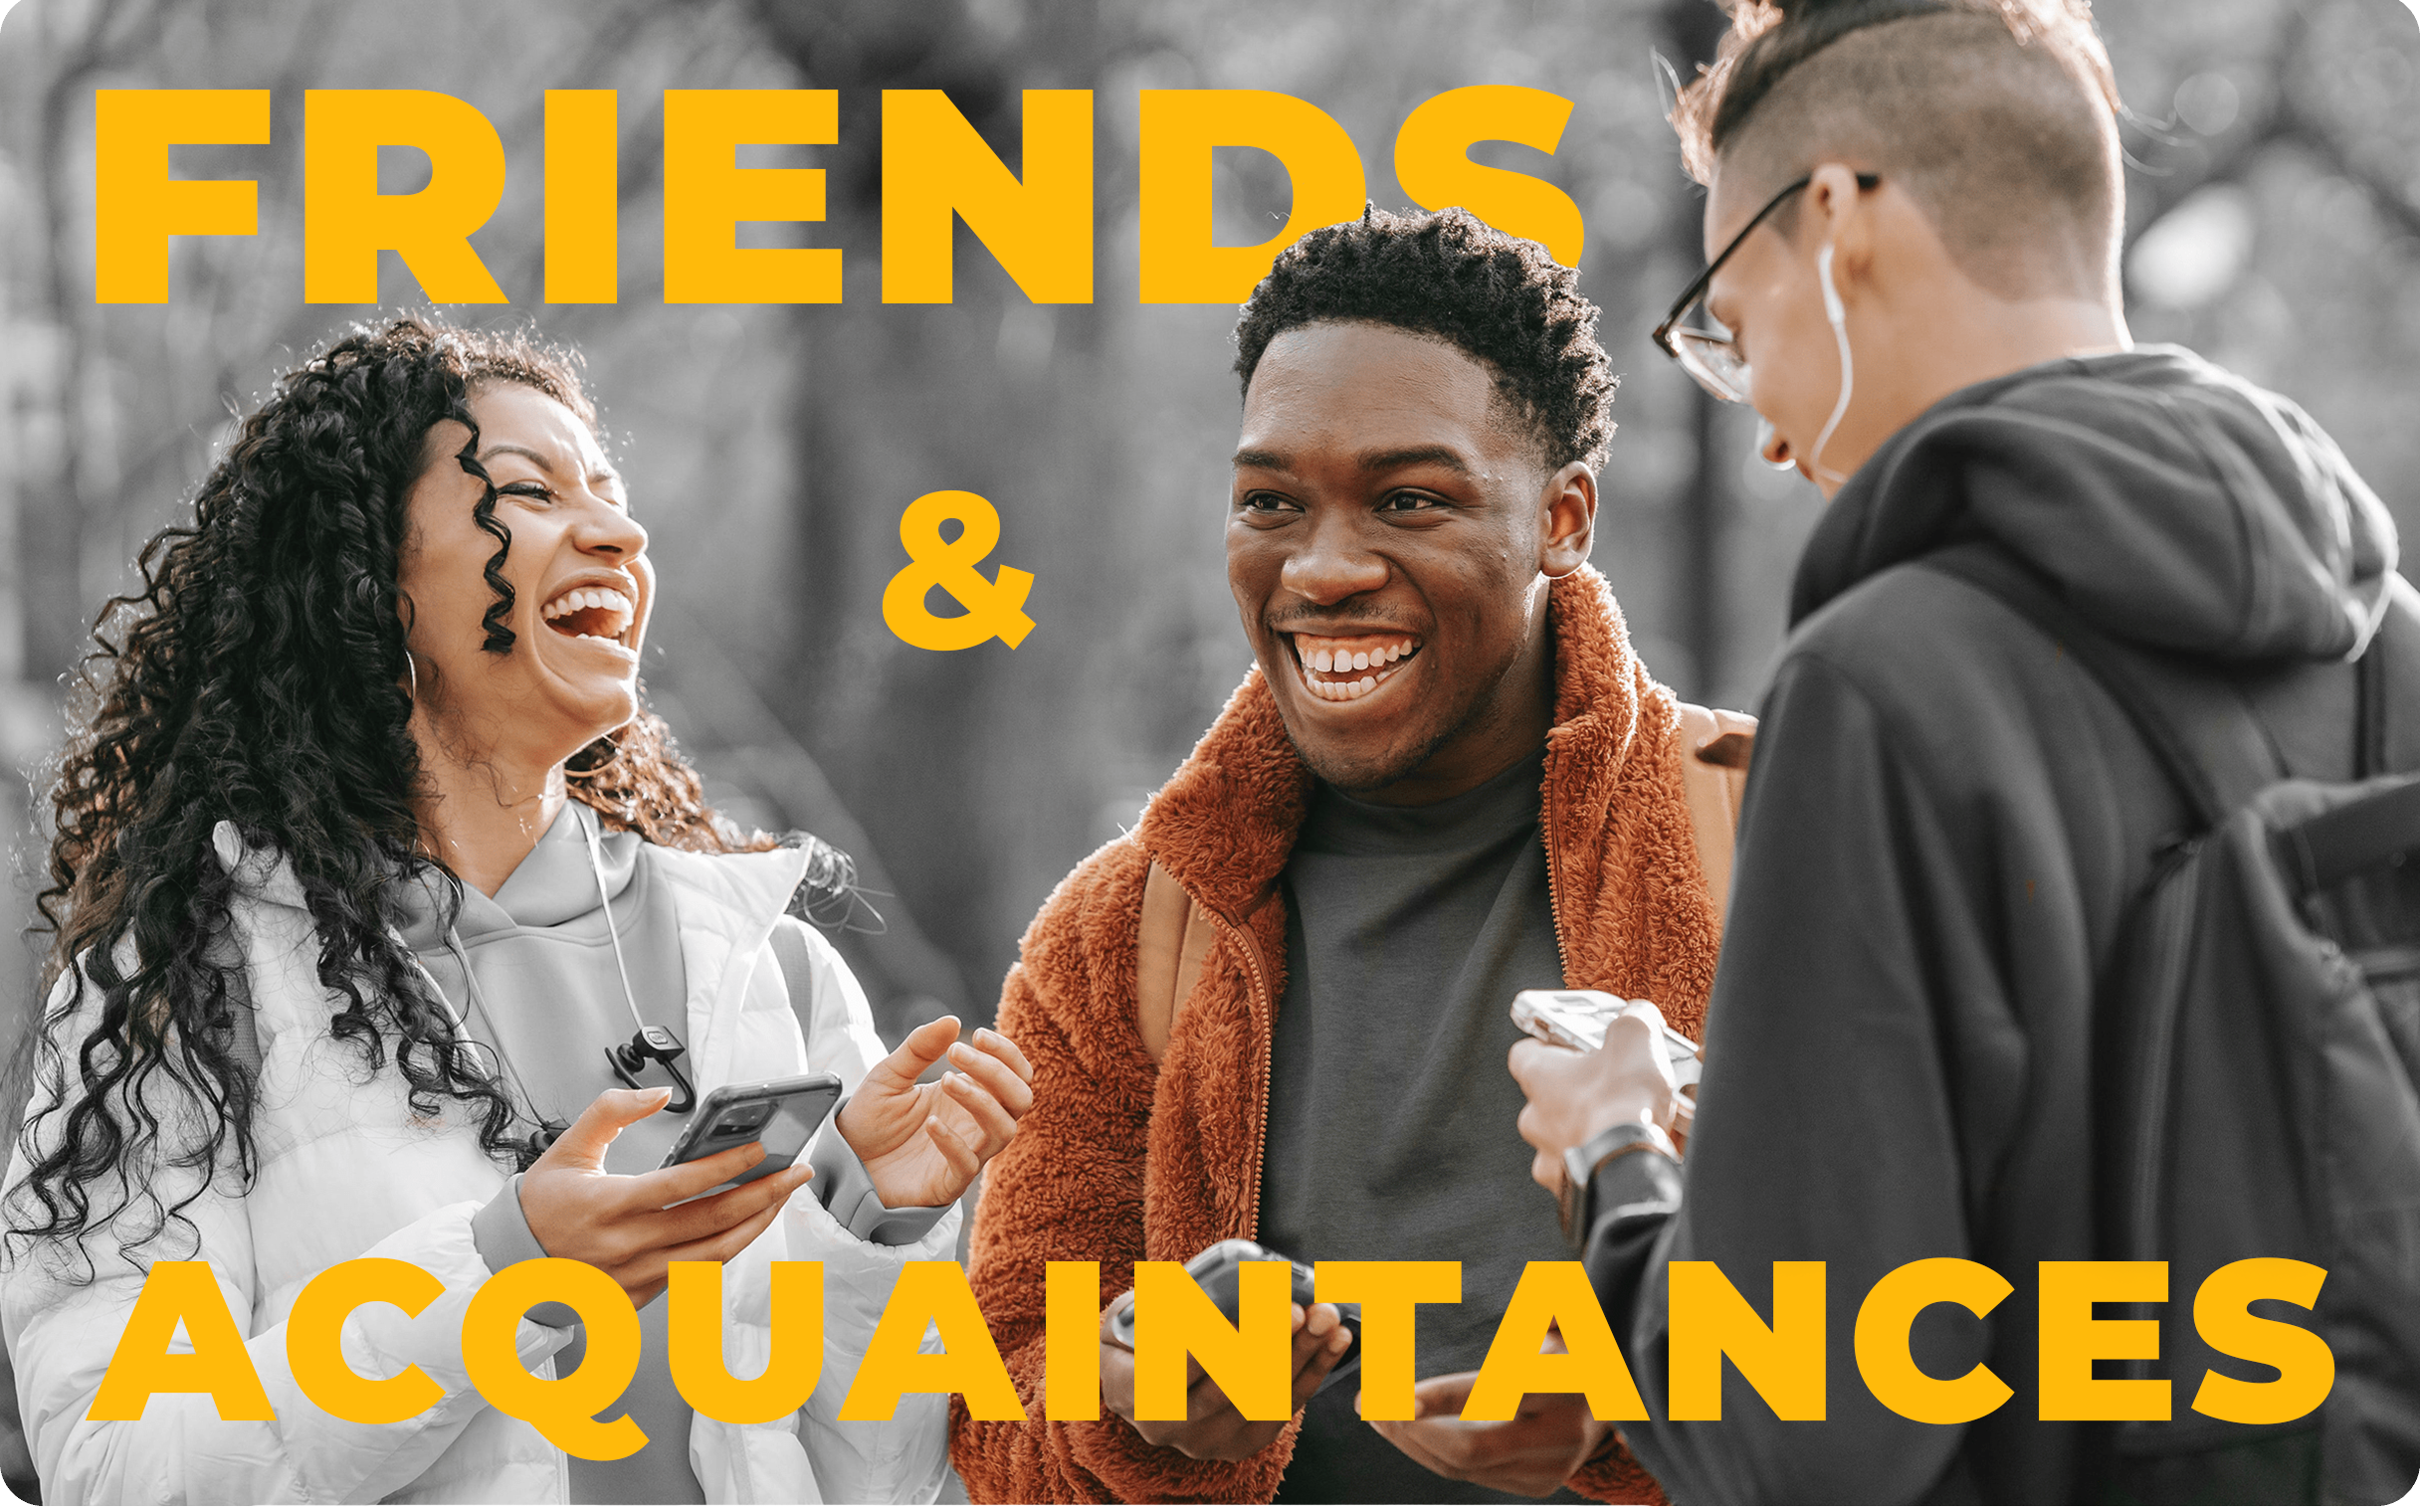 What's the difference between "friends" and "acquaintances"?